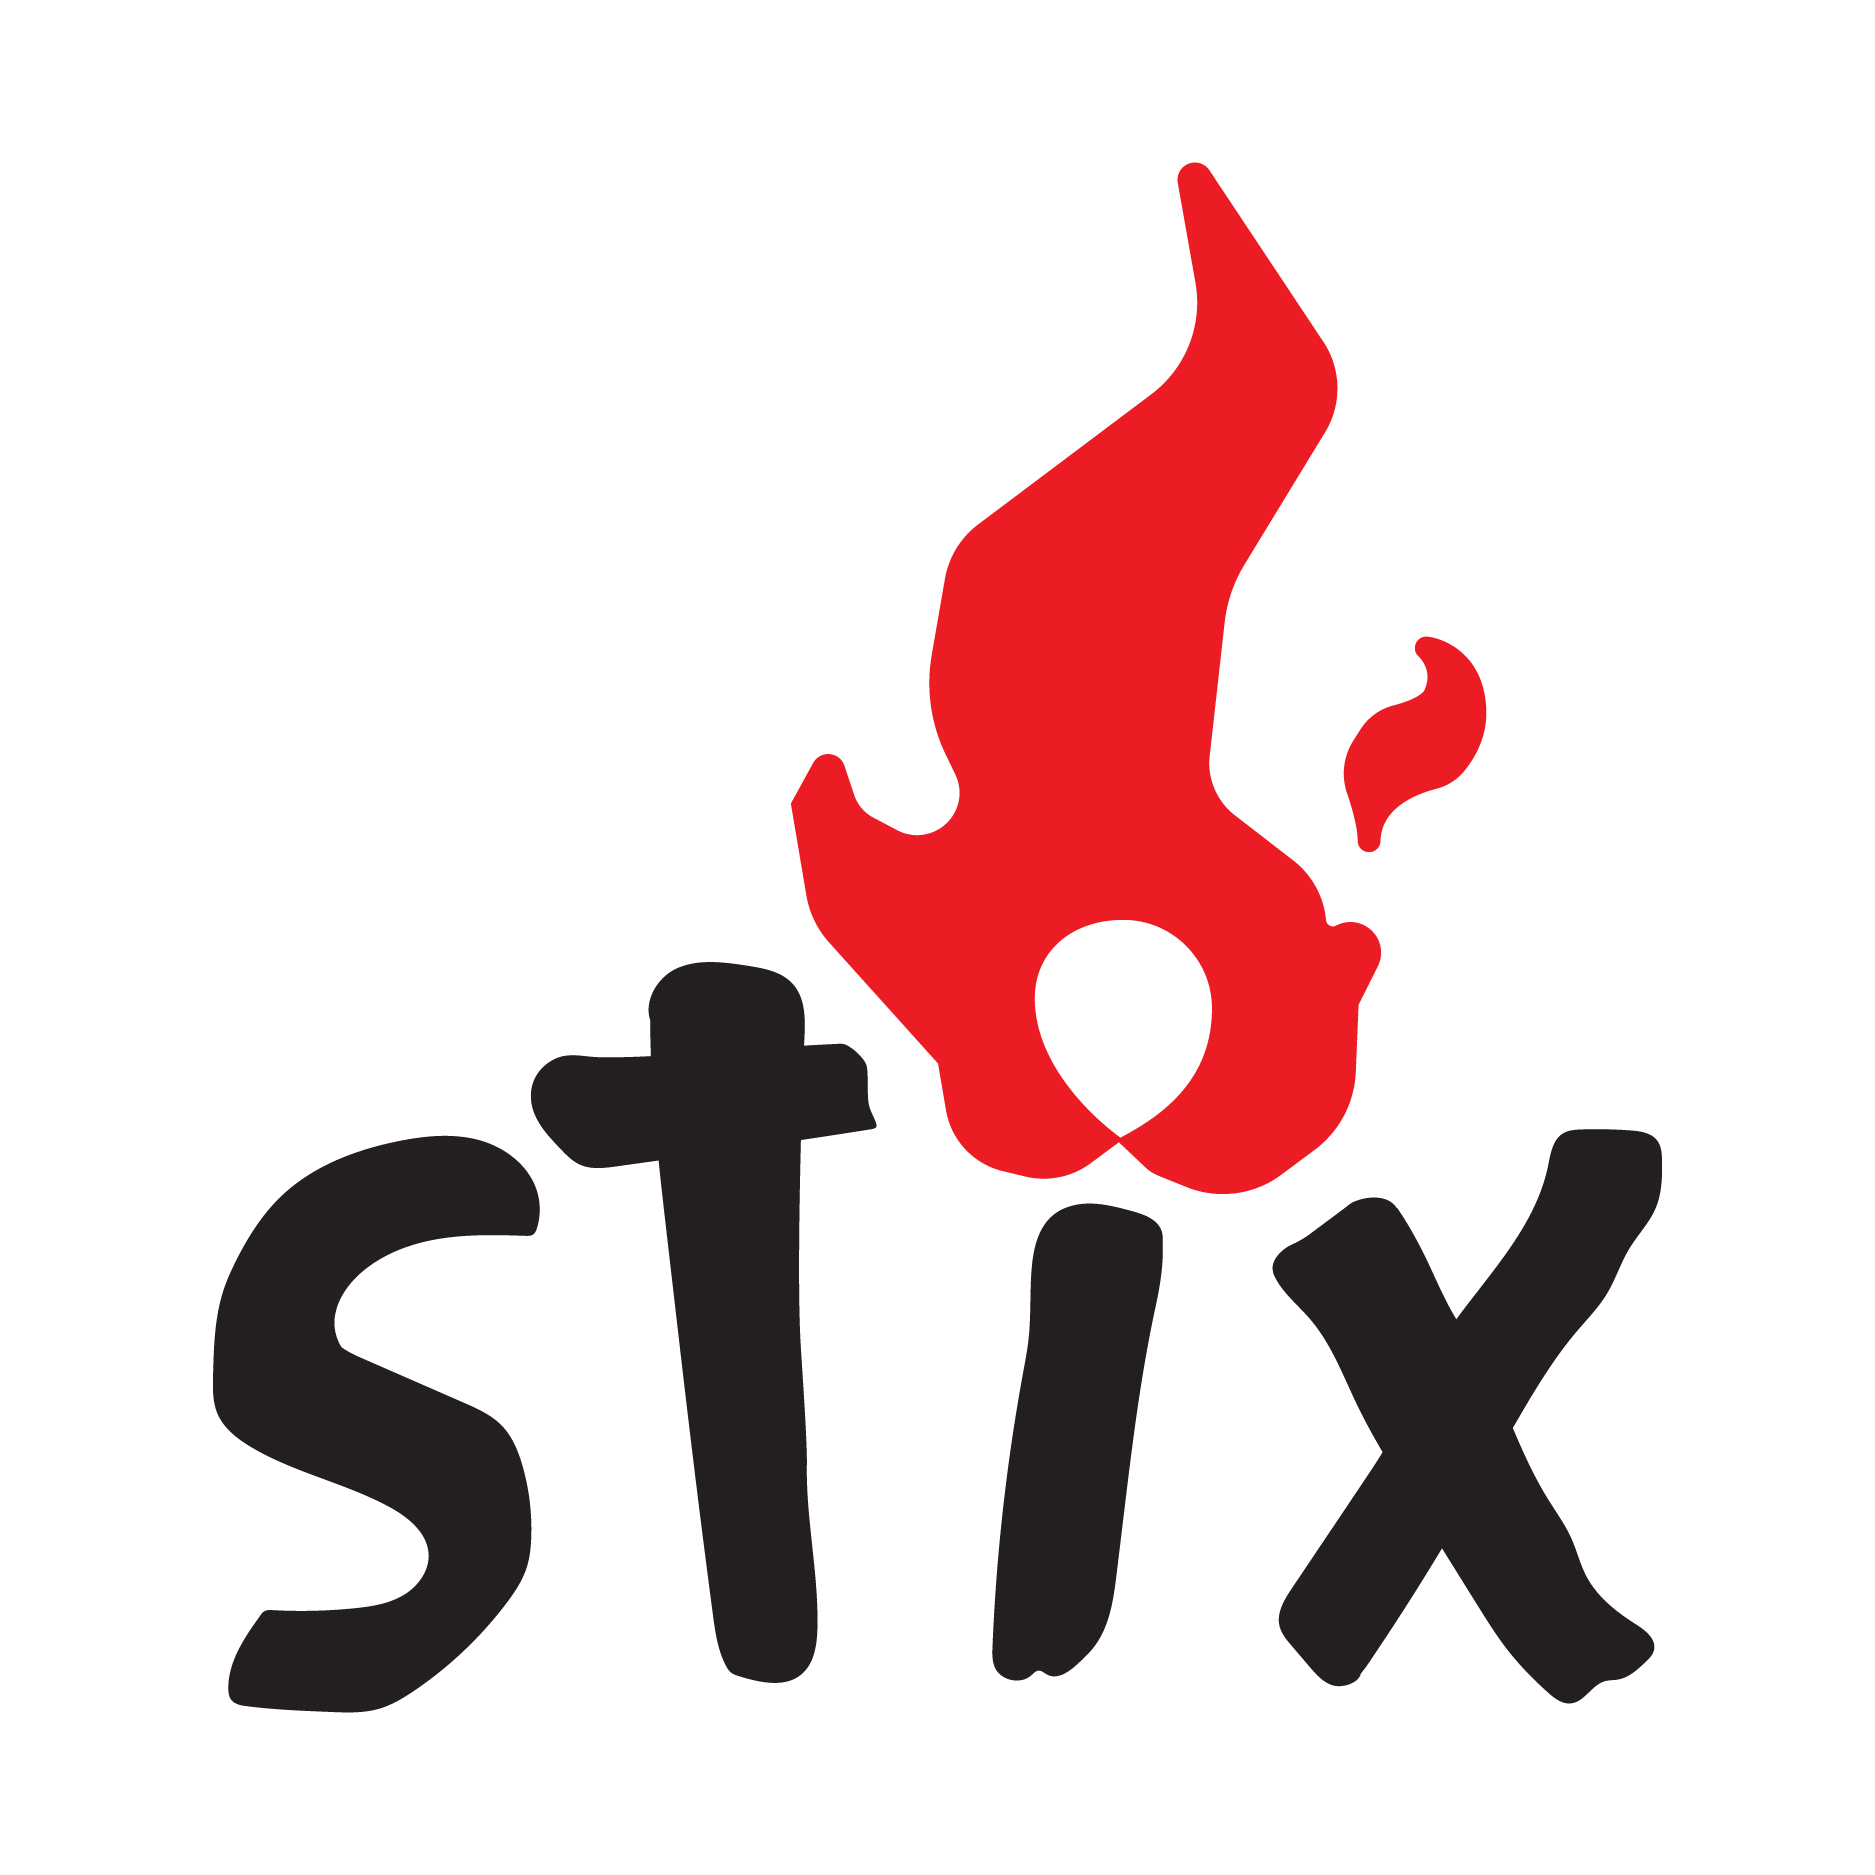 Stix logo design by logo designer MSC Creative for your inspiration and for the worlds largest logo competition